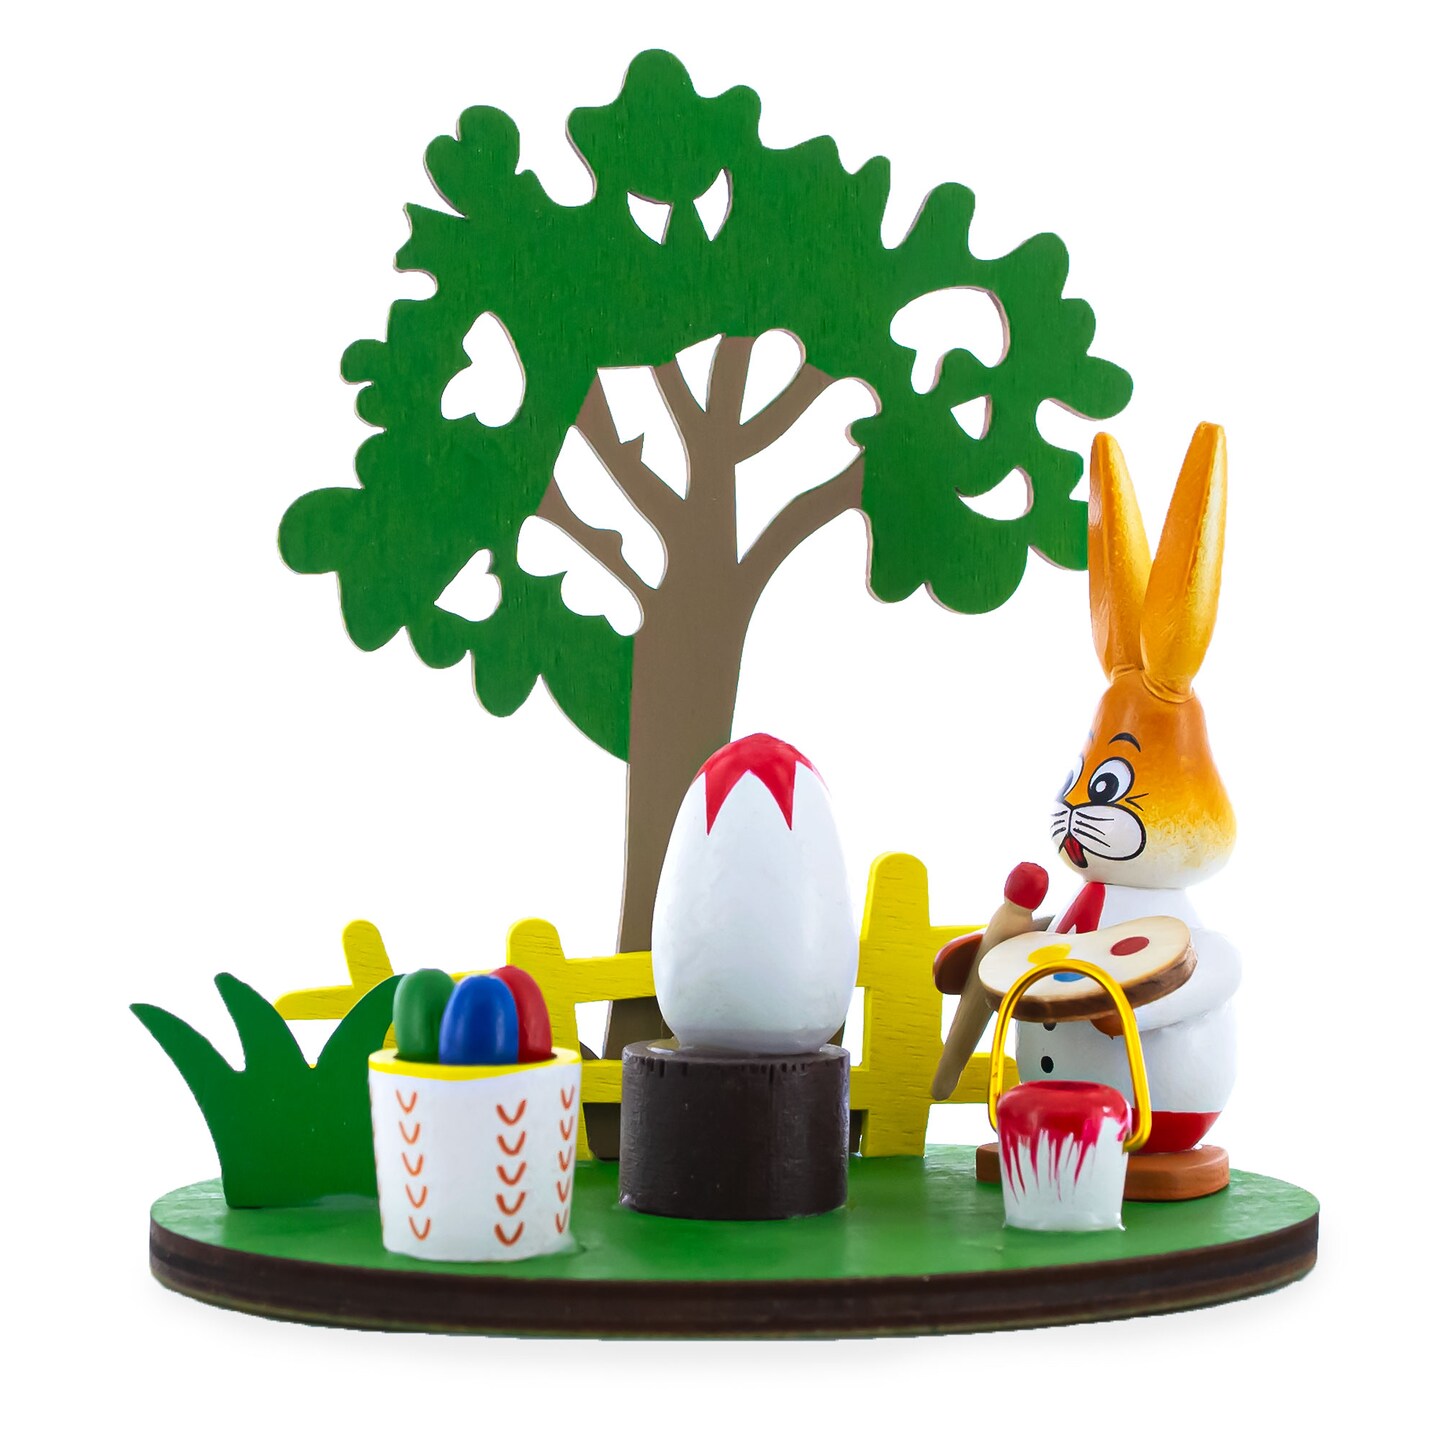 Wooden Bunny Figurine Decorating Easter Eggs